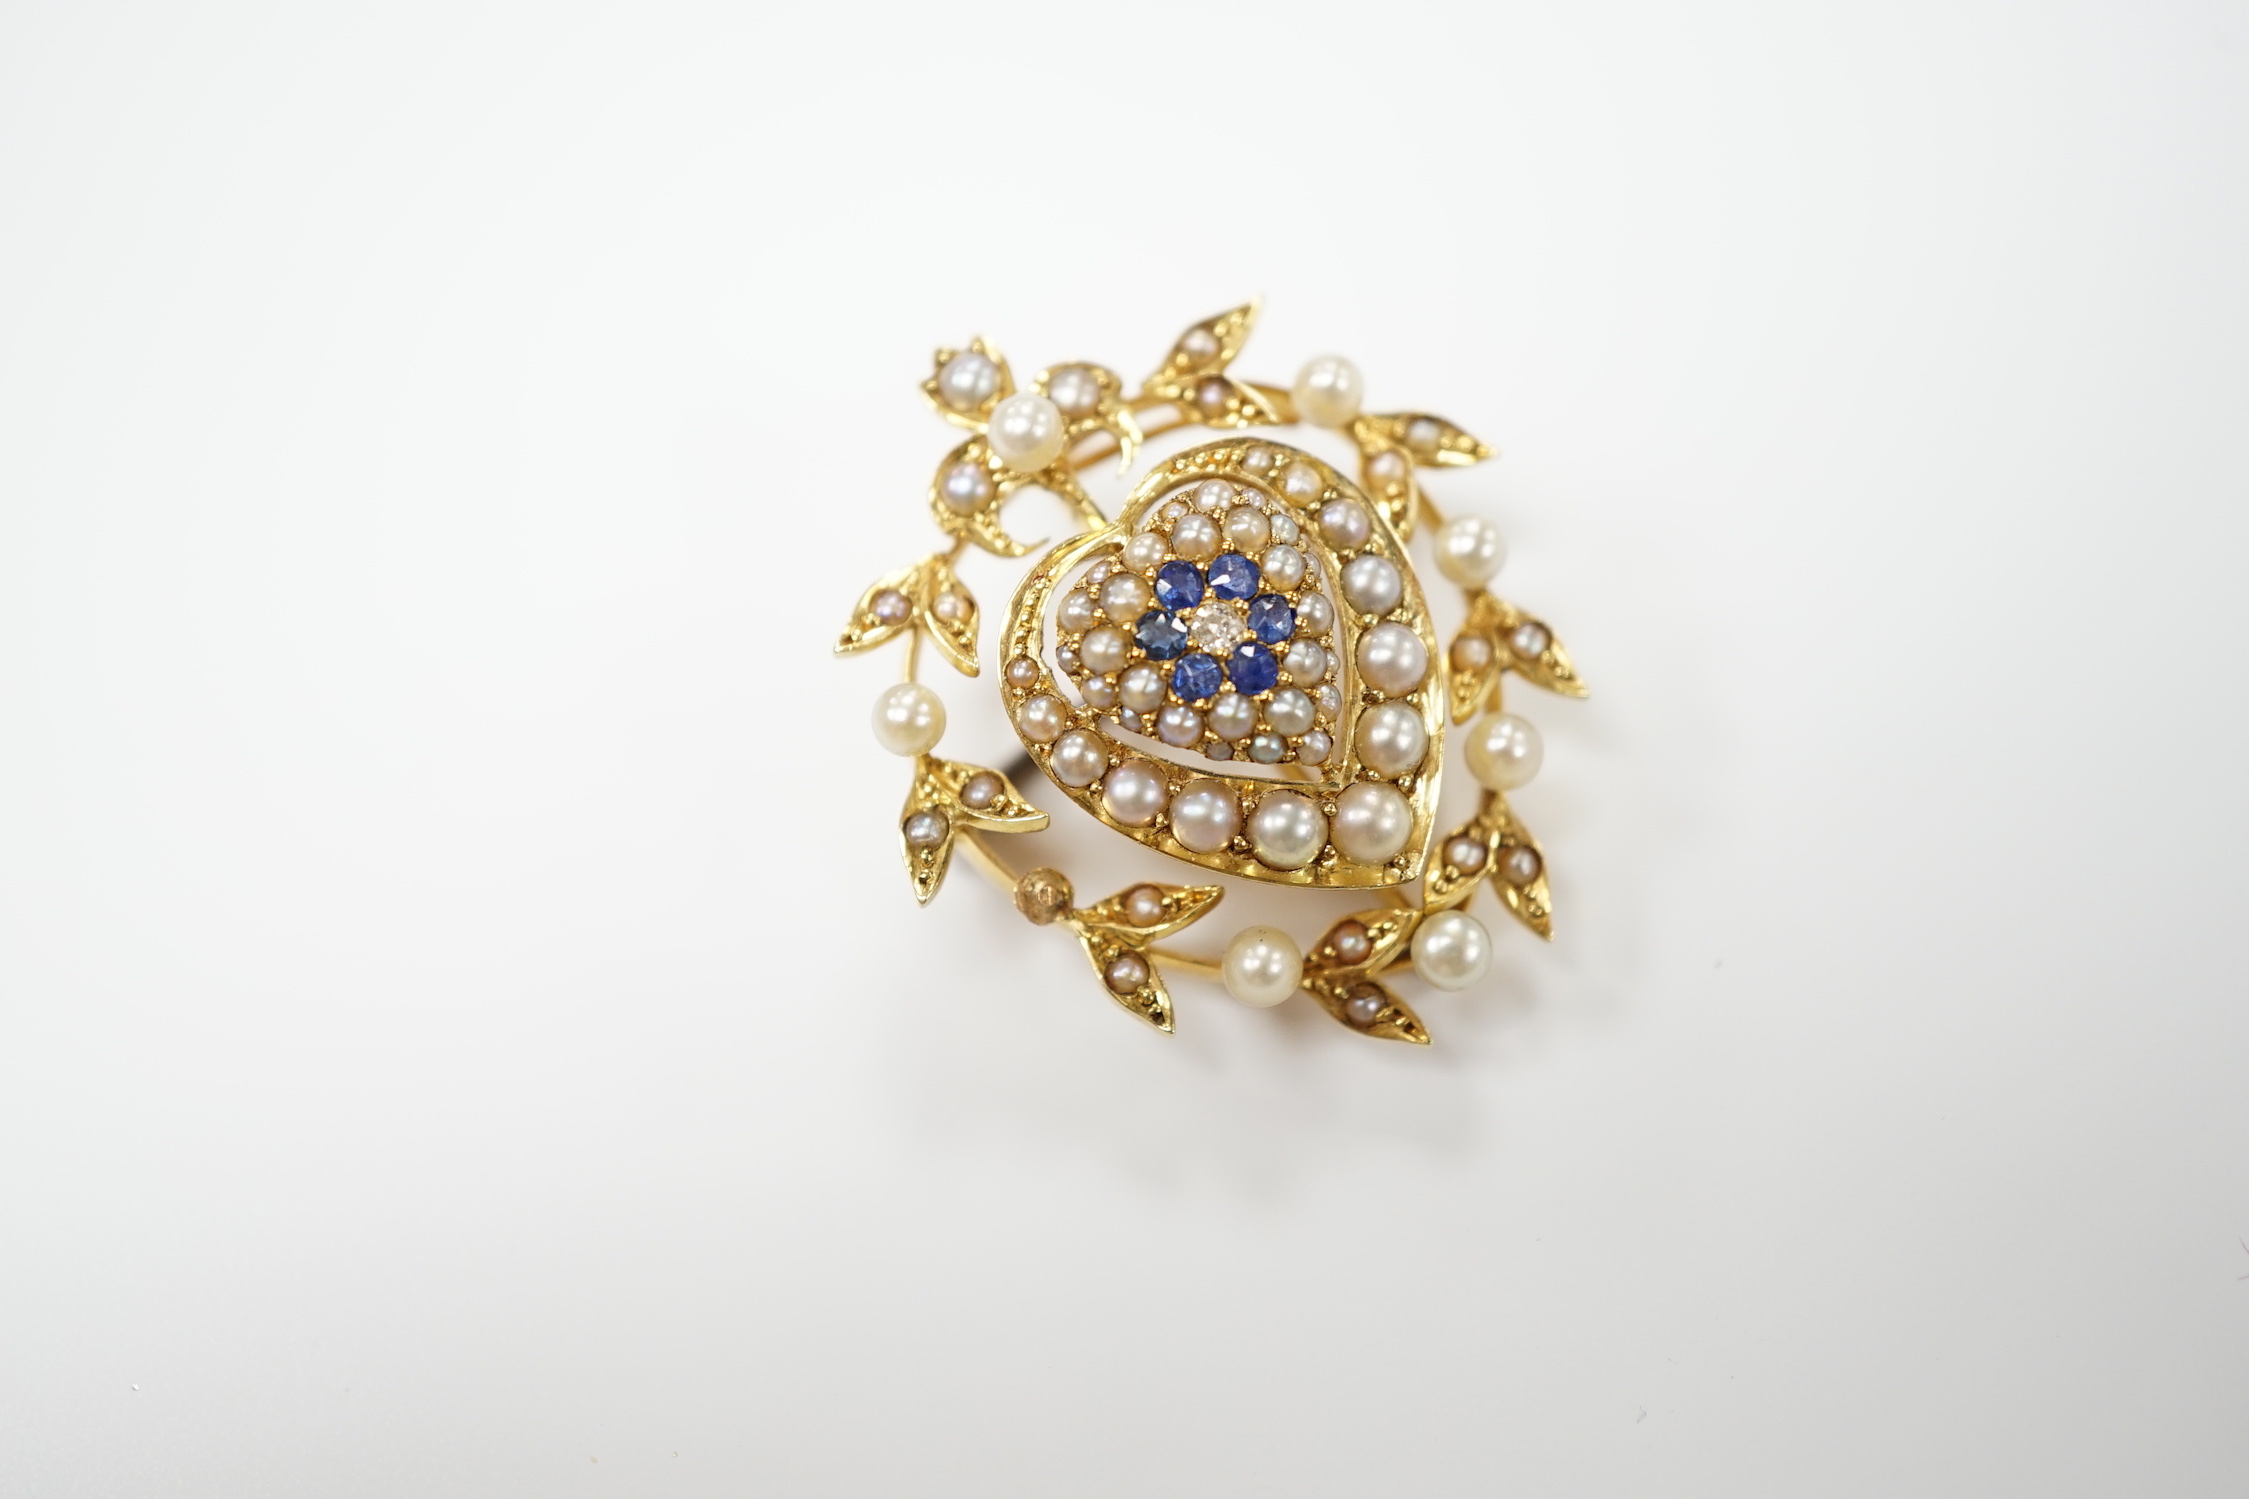 A yellow metal, sapphire, diamond and seed pearl set pendant brooch, with central heart motif, 30mm, gross weight 6.8 grams.